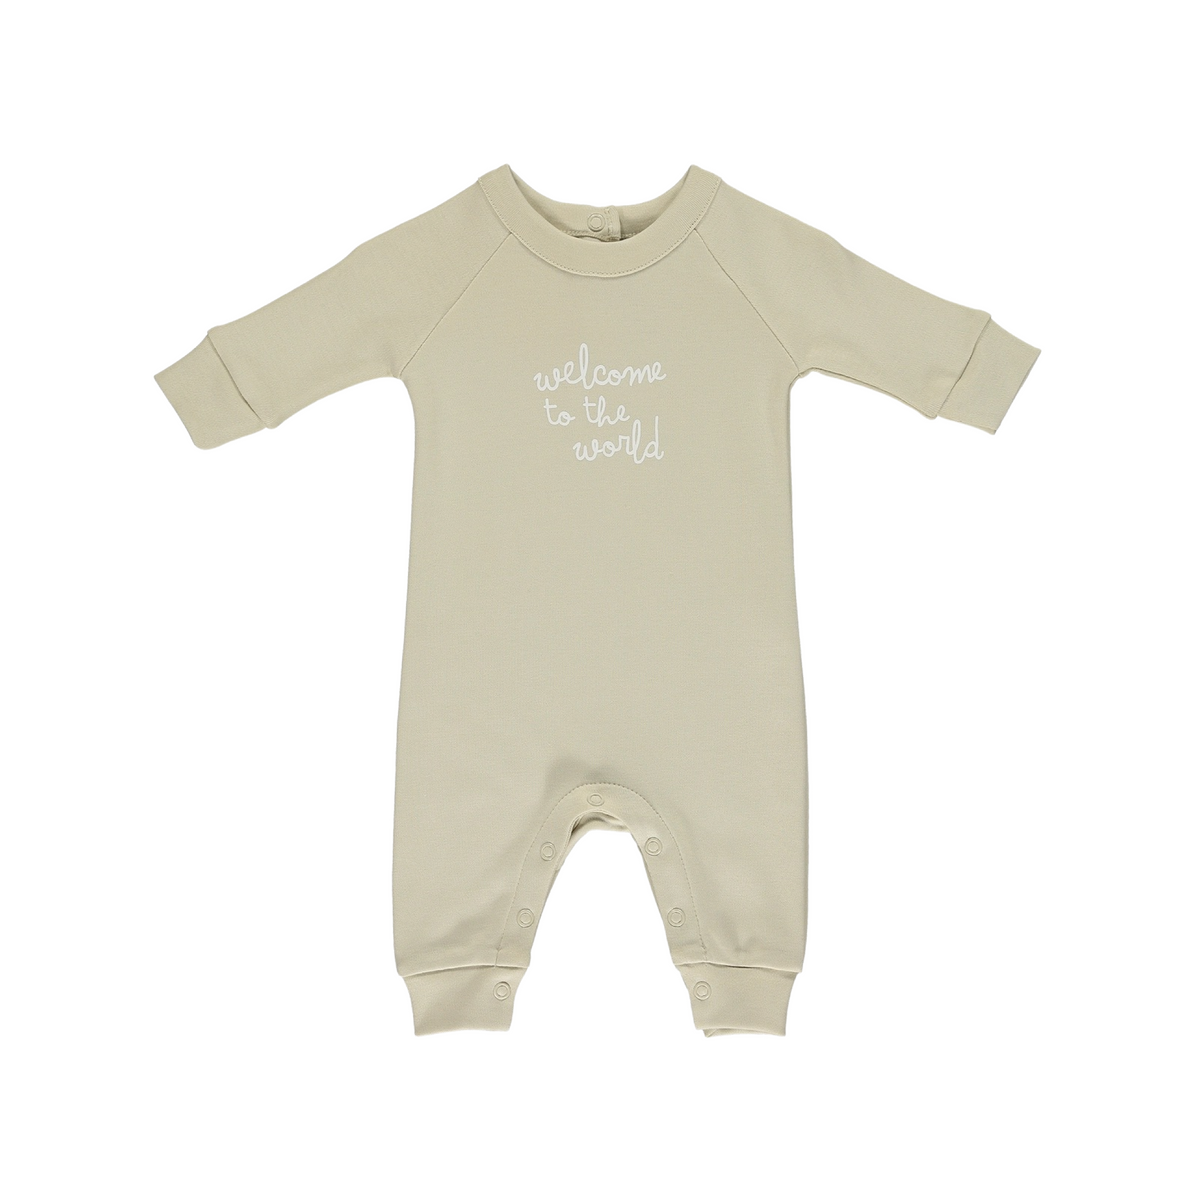 “Welcome To The World” Romper